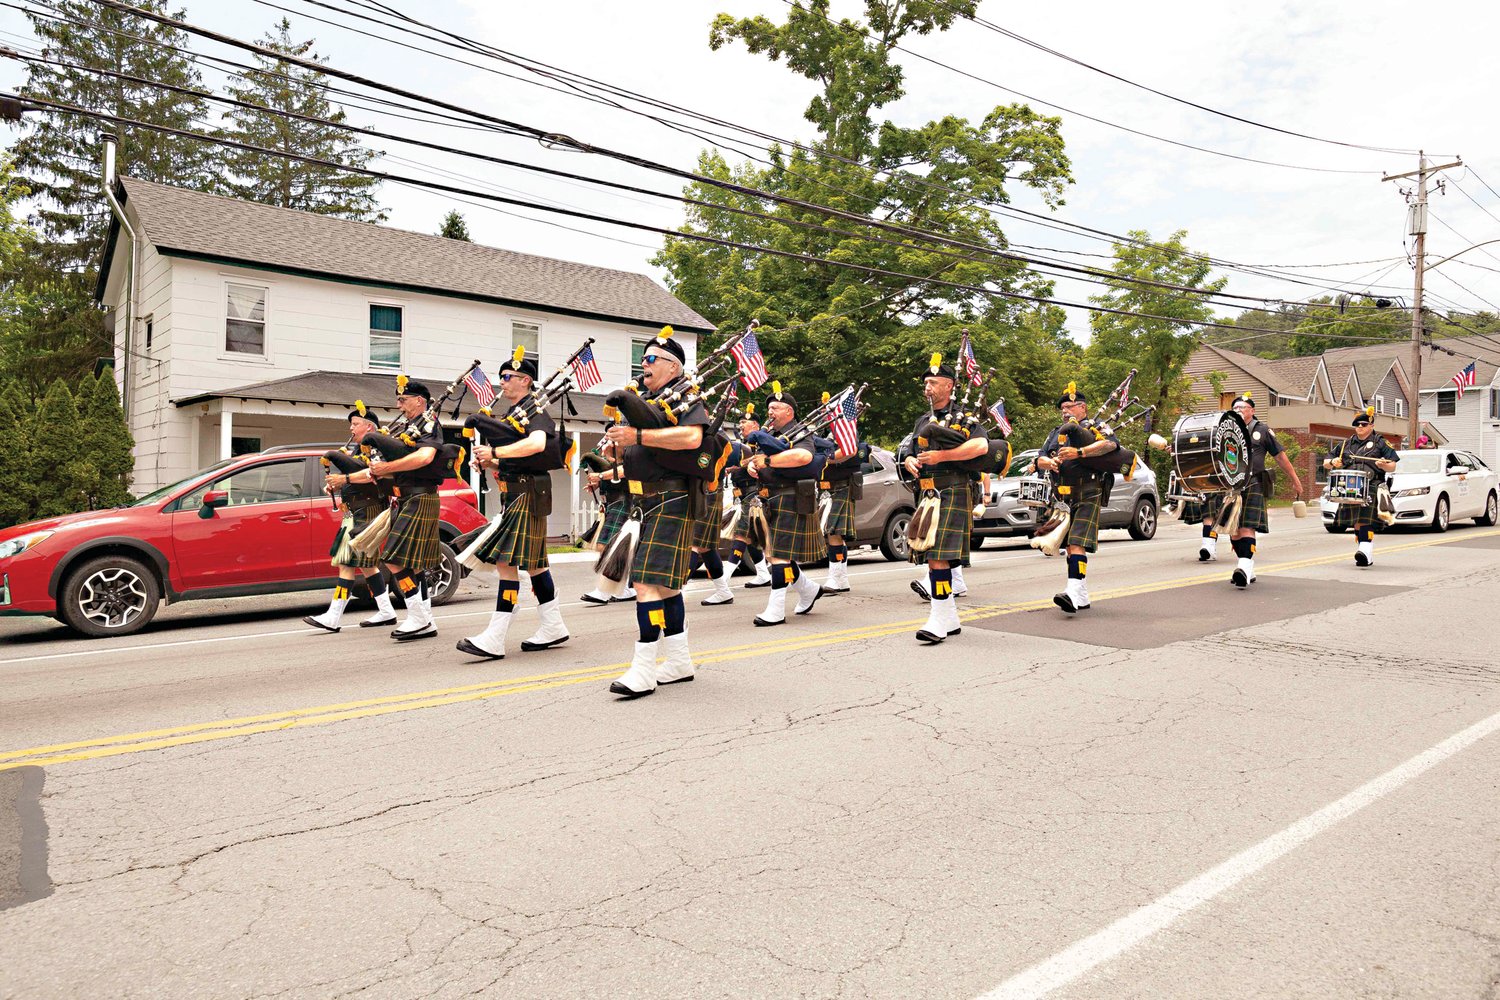 Hudson Vallery Regional Police Pipe and Drums music filled the air during Wurtsboro’s Memorial Day Parade.